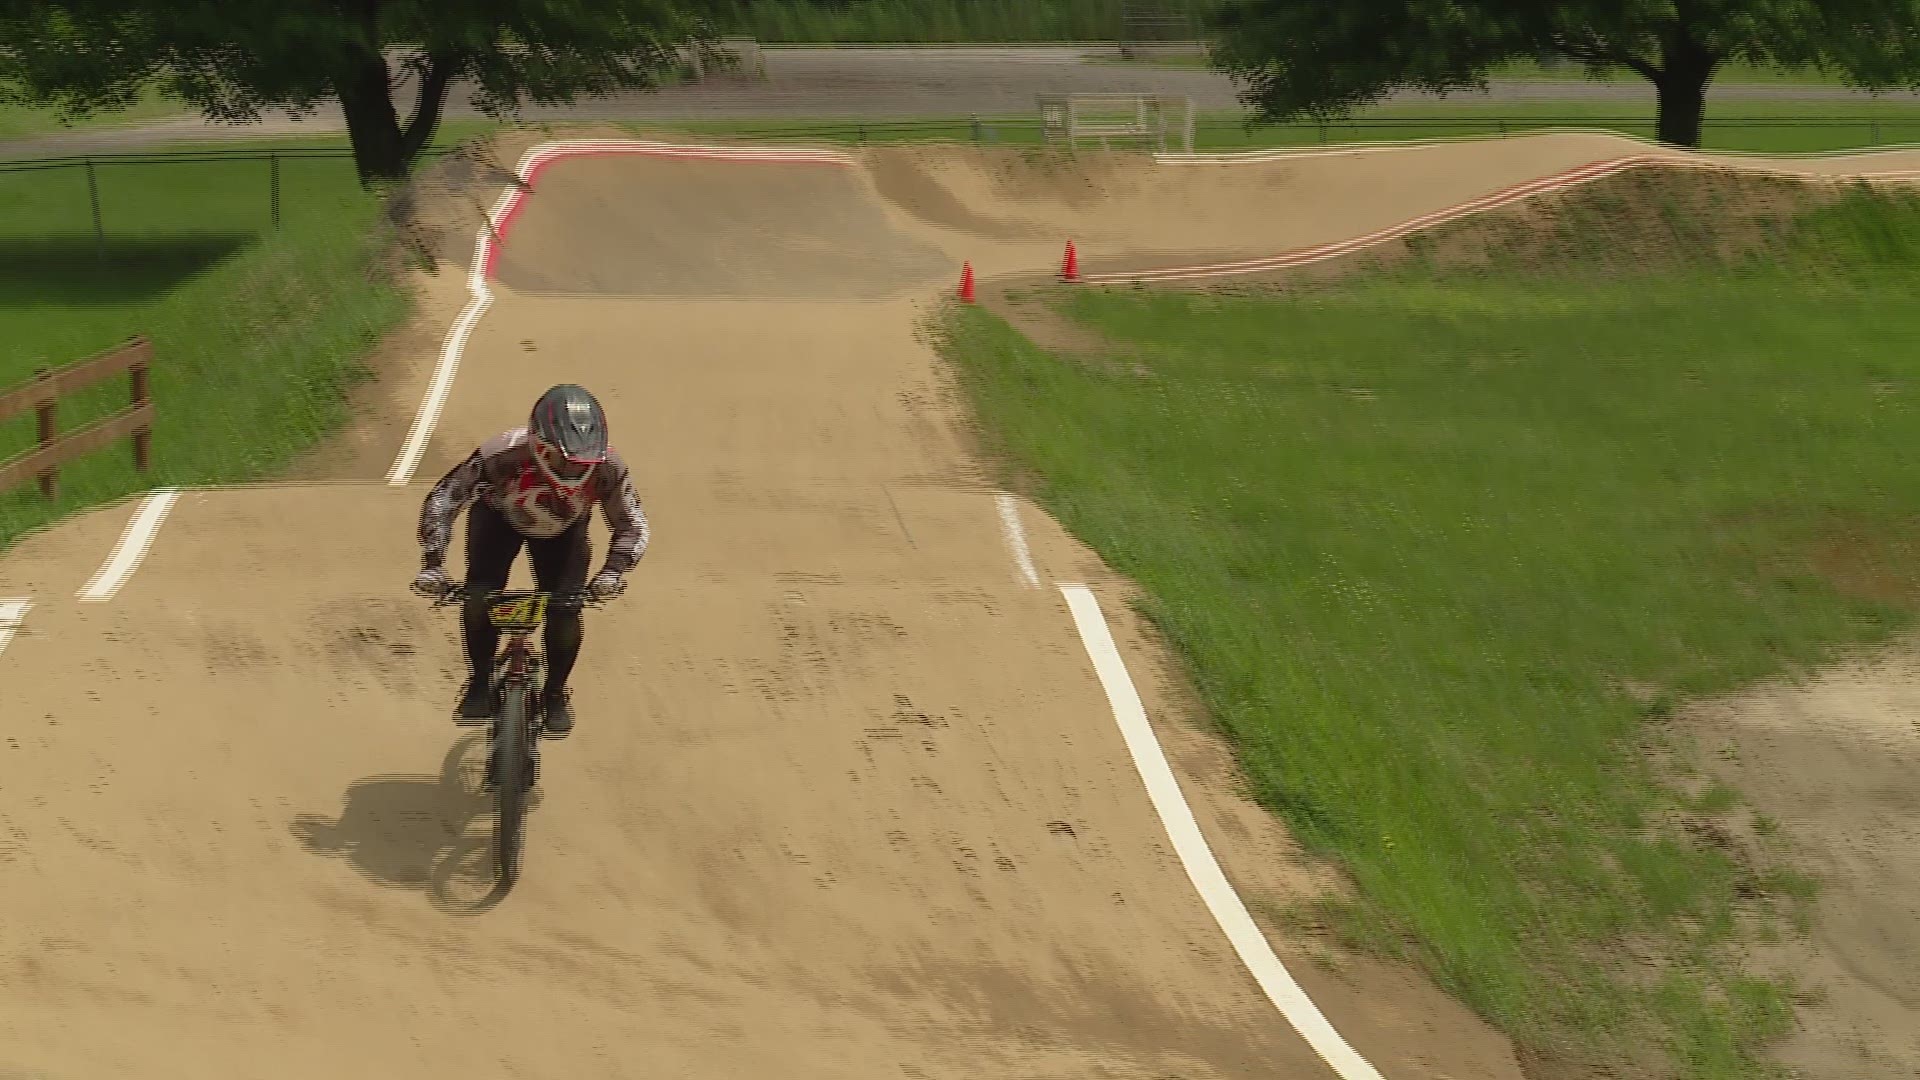 WKYC's Sara Shookman tried BMX and track cycling. It was certainly an experience!